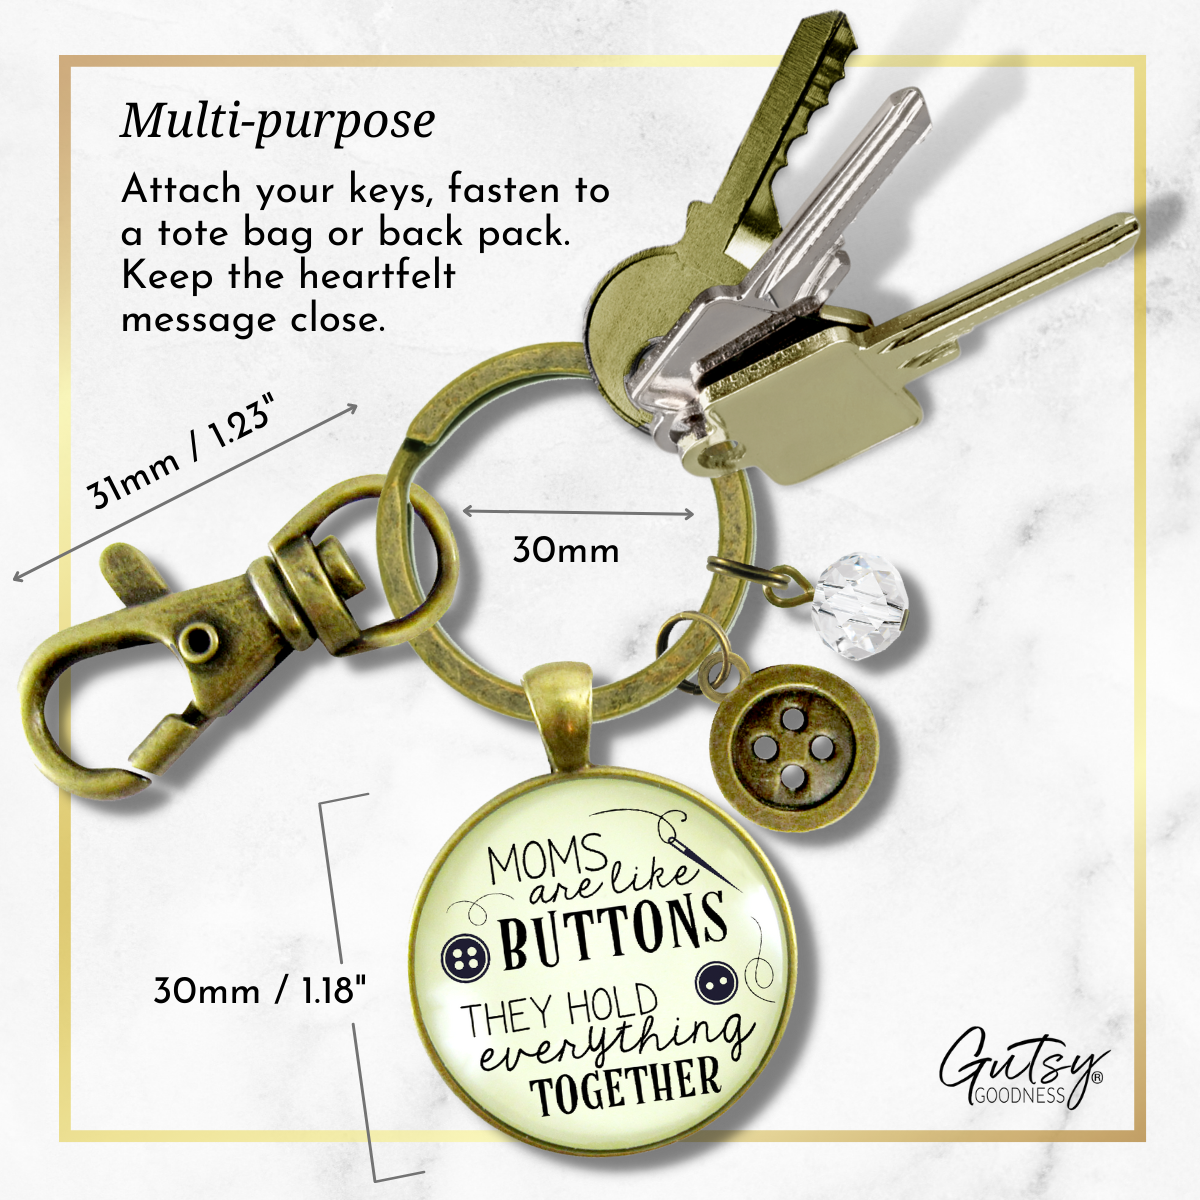 Family Keychain Moms Are Like Buttons They Hold Everything Together Seamstress Jewelry - Gutsy Goodness Handmade Jewelry;Family Keychain Moms Are Like Buttons They Hold Everything Together Seamstress Jewelry - Gutsy Goodness Handmade Jewelry Gifts